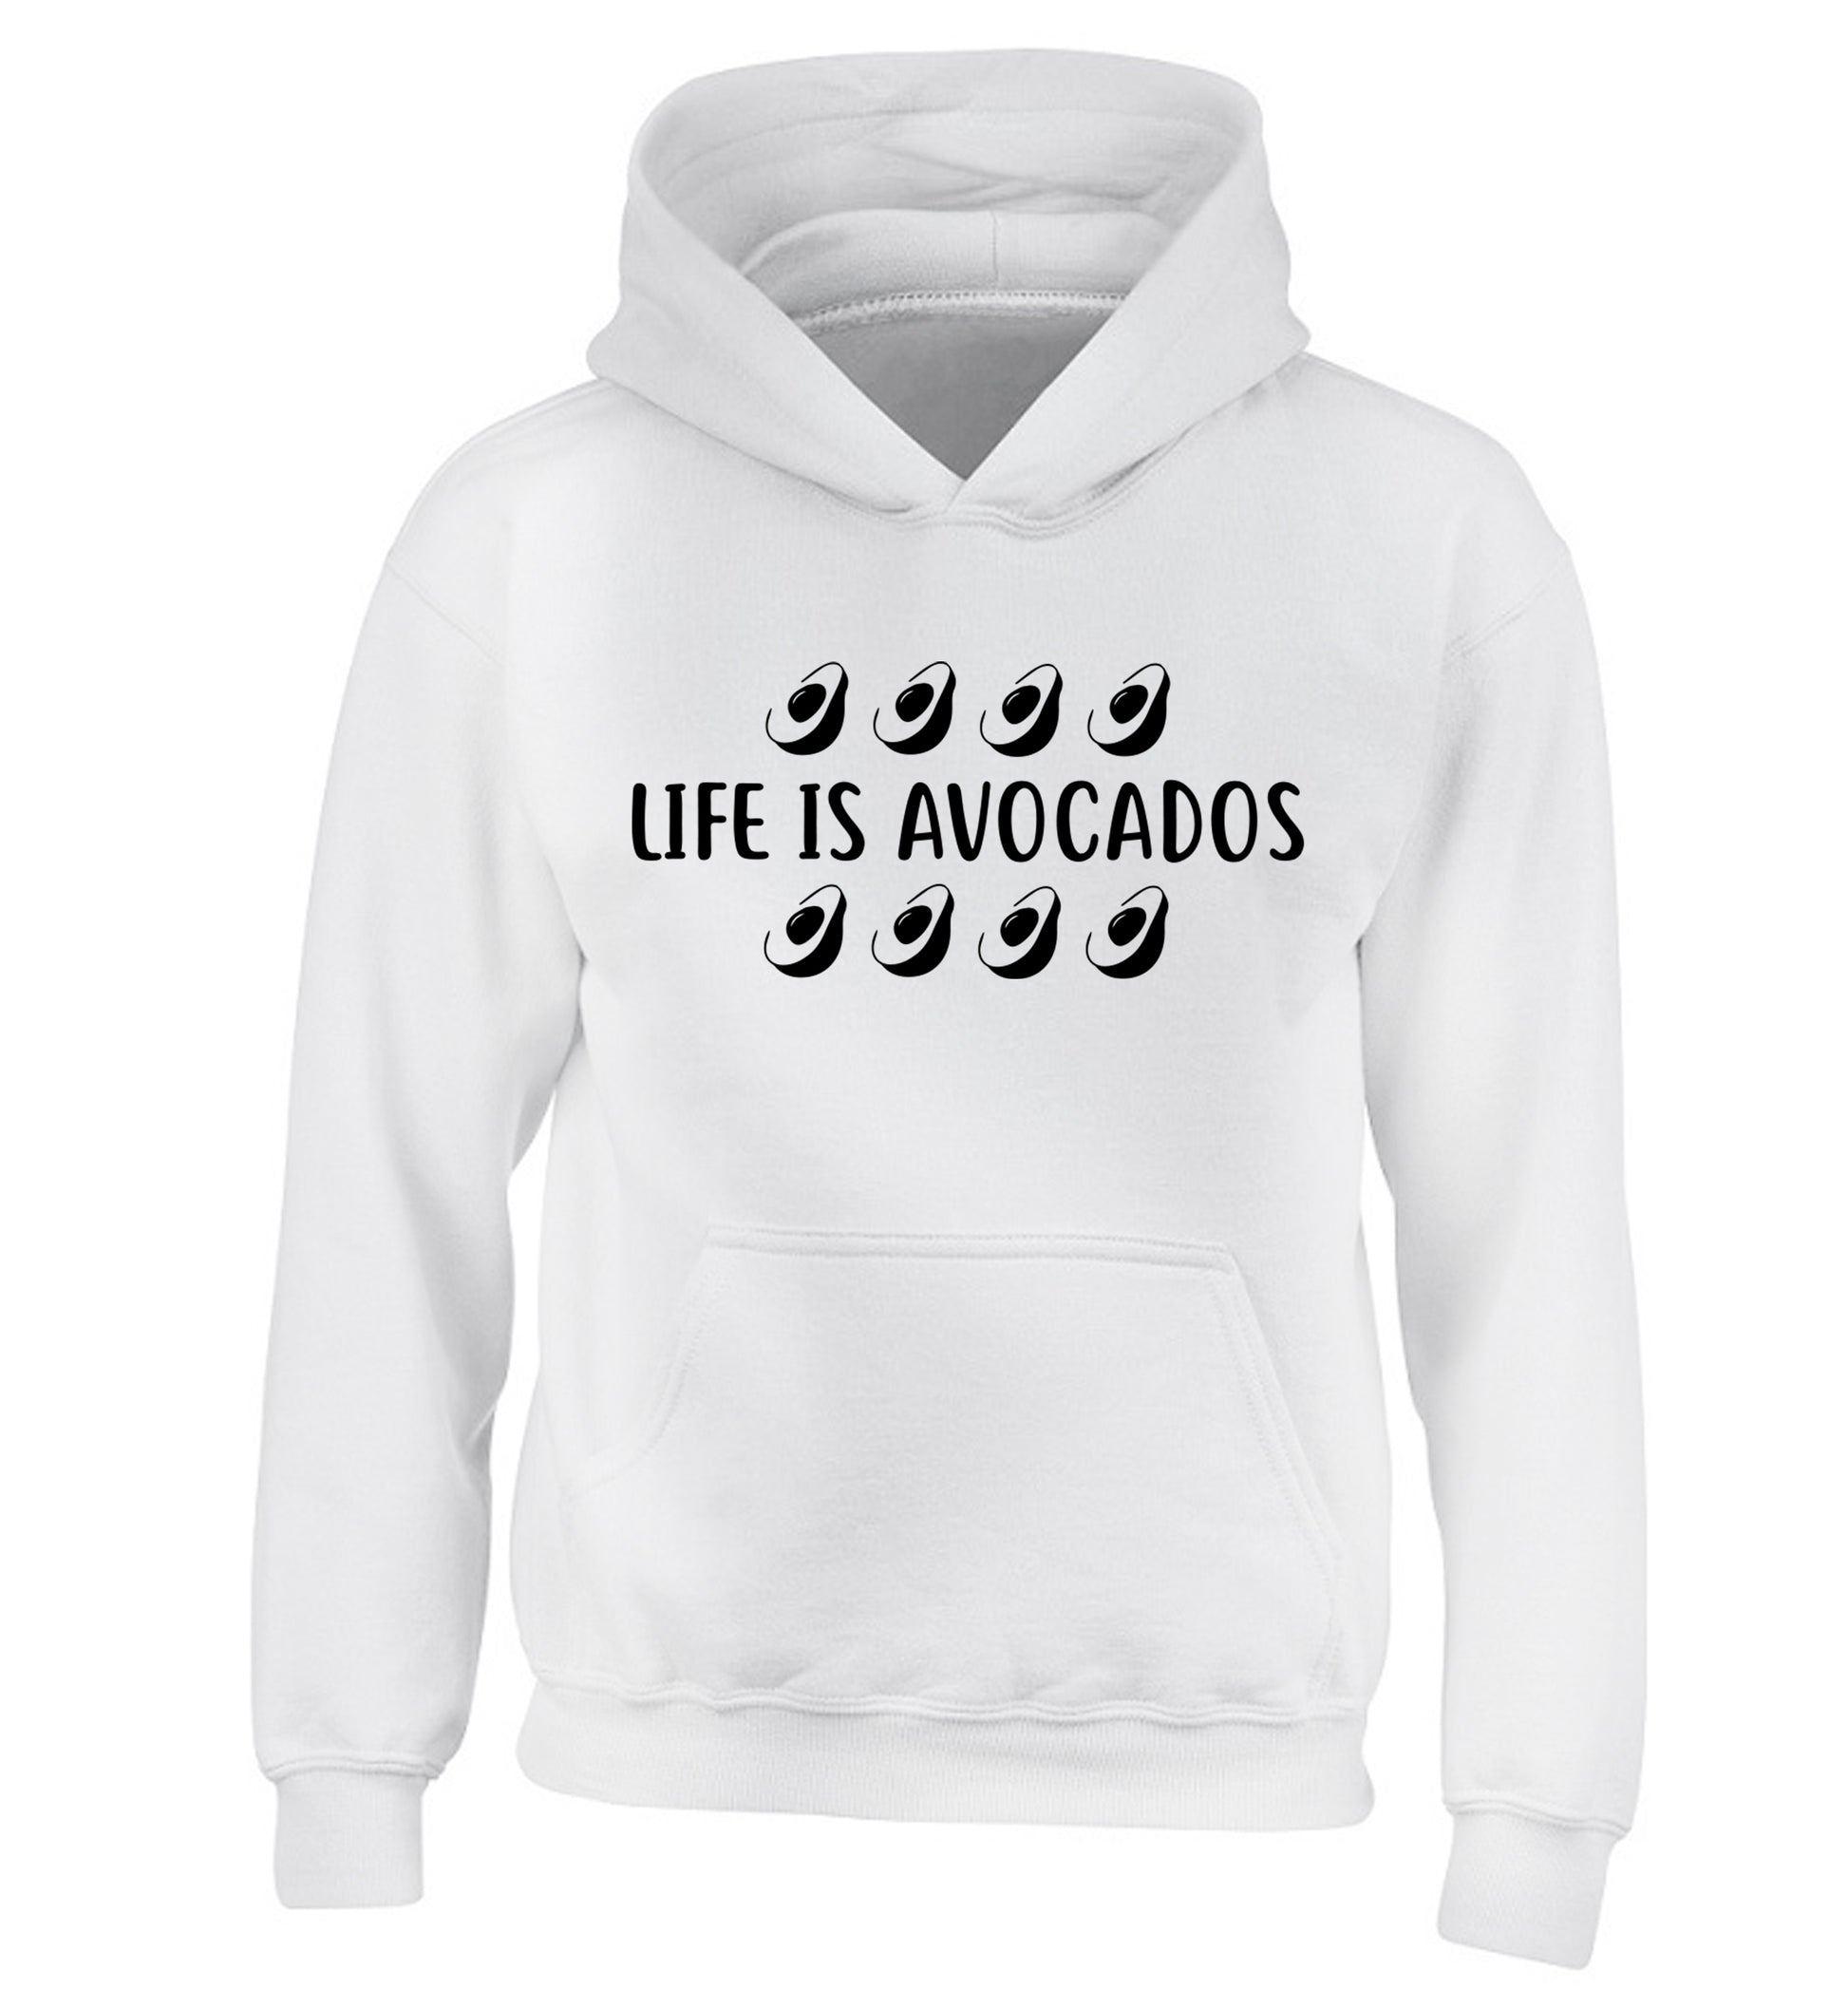 Life is avocados children's white hoodie 12-14 Years